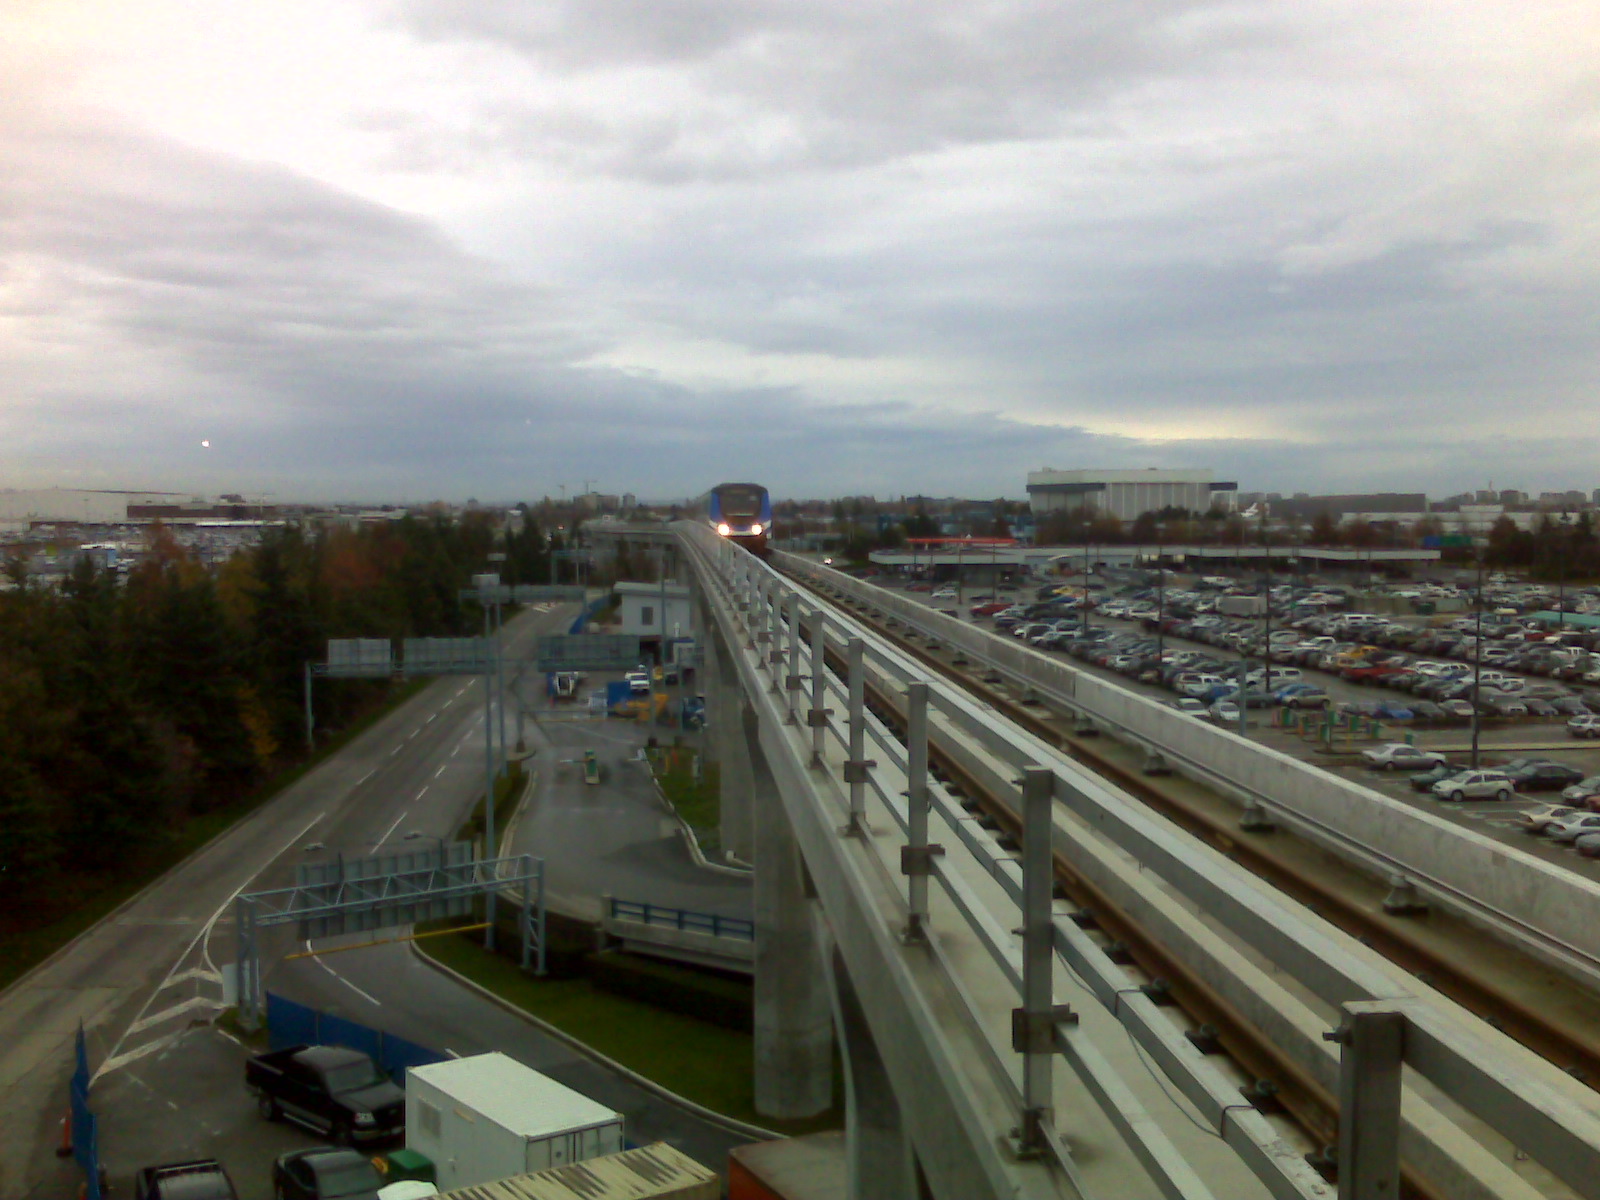 The Canada Line train approaches Vancouver International Airport Station.